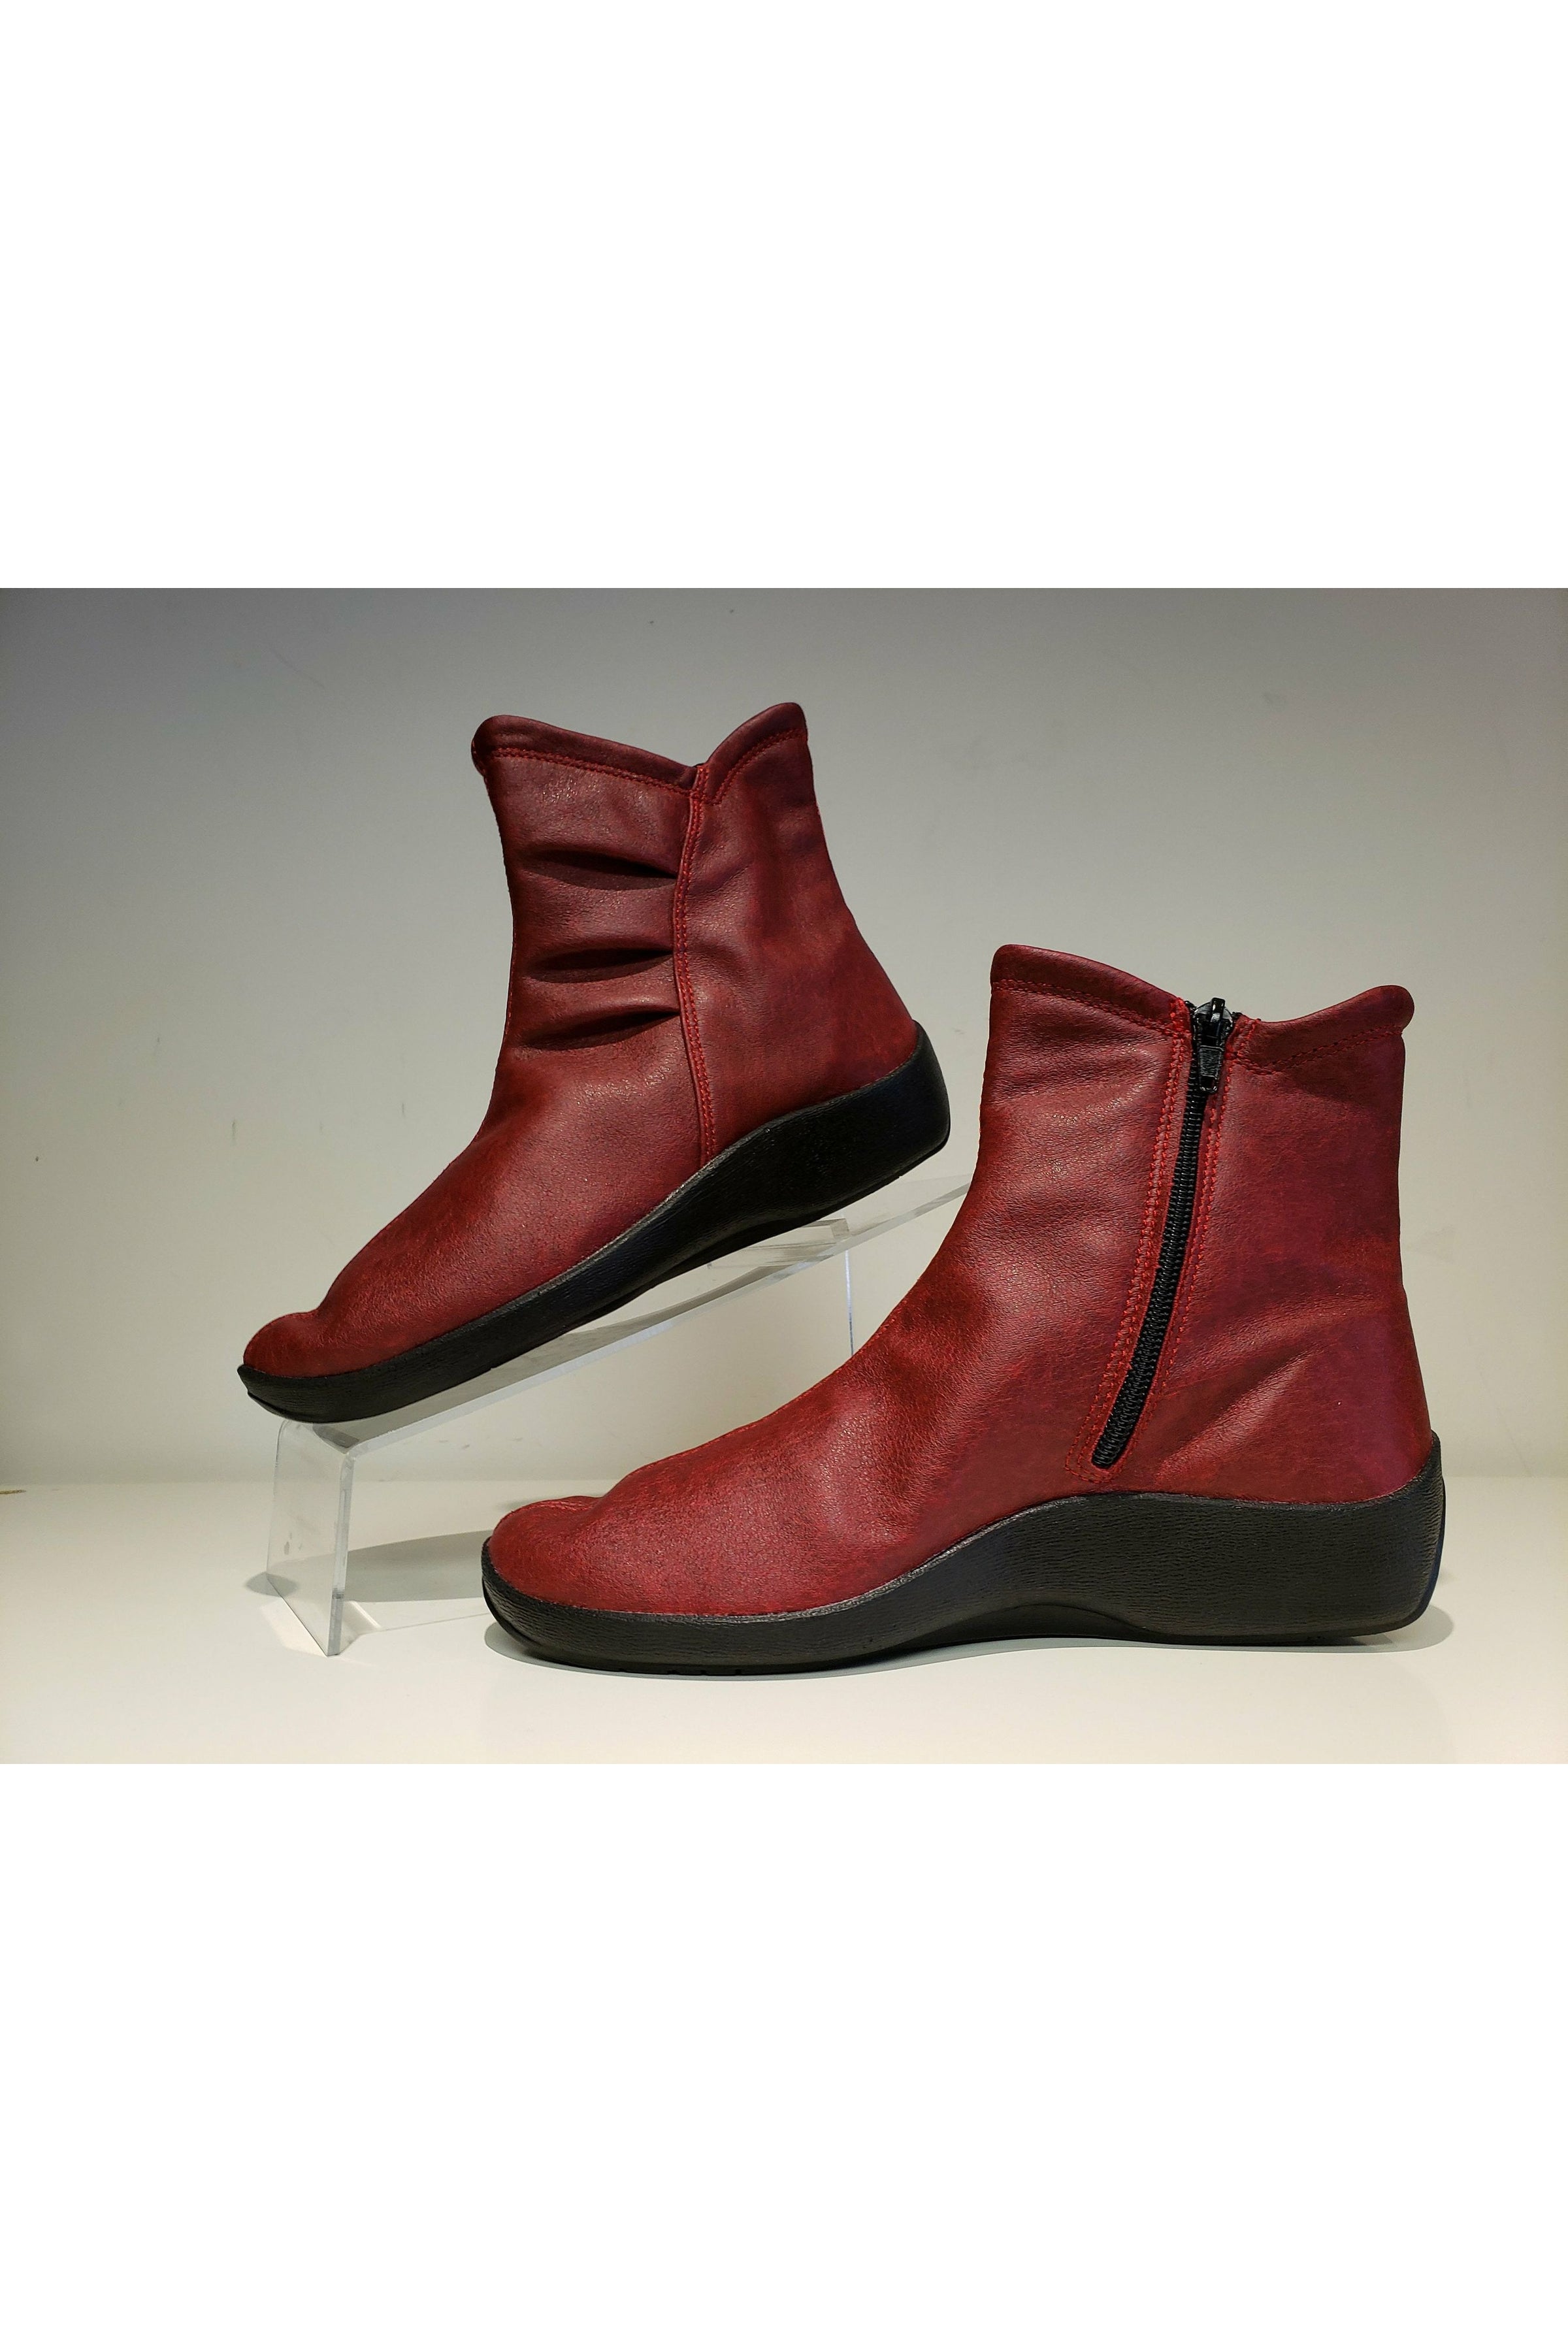 Arcopedico Ankle Boot - Style 4281-L19, pair, cherry